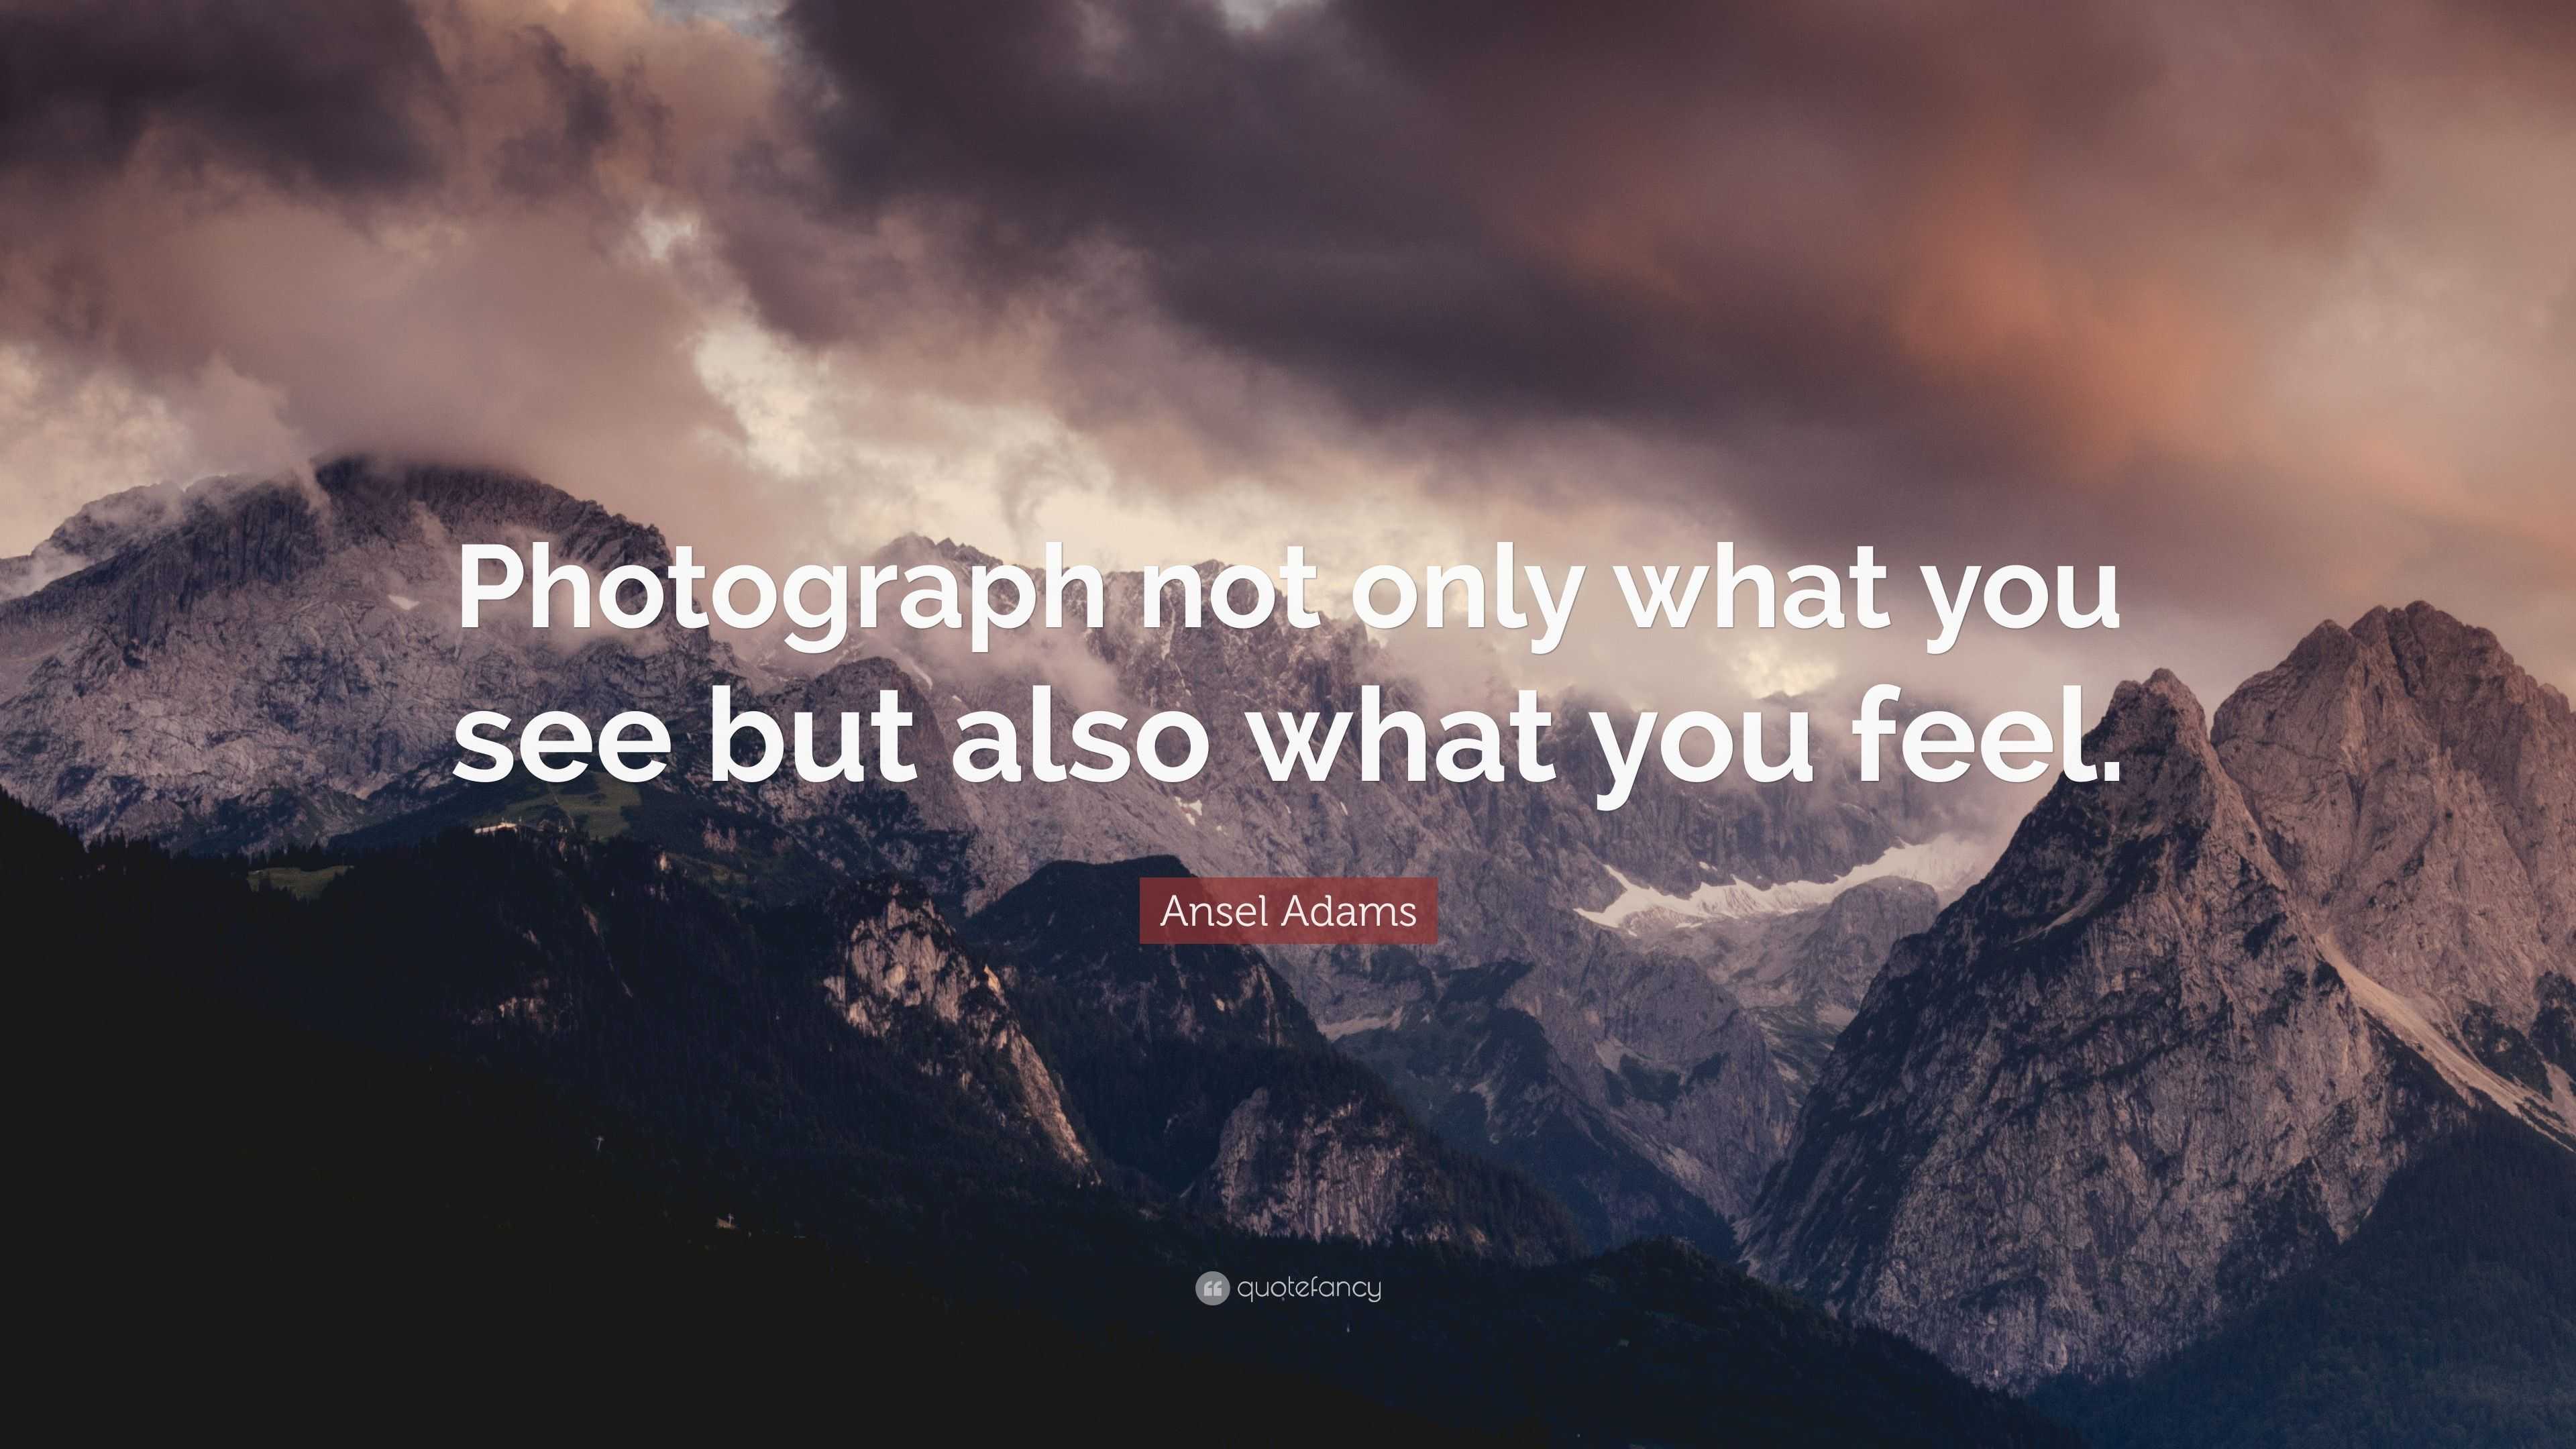 Ansel Adams Quote: “Photograph not only what you see but also what you ...